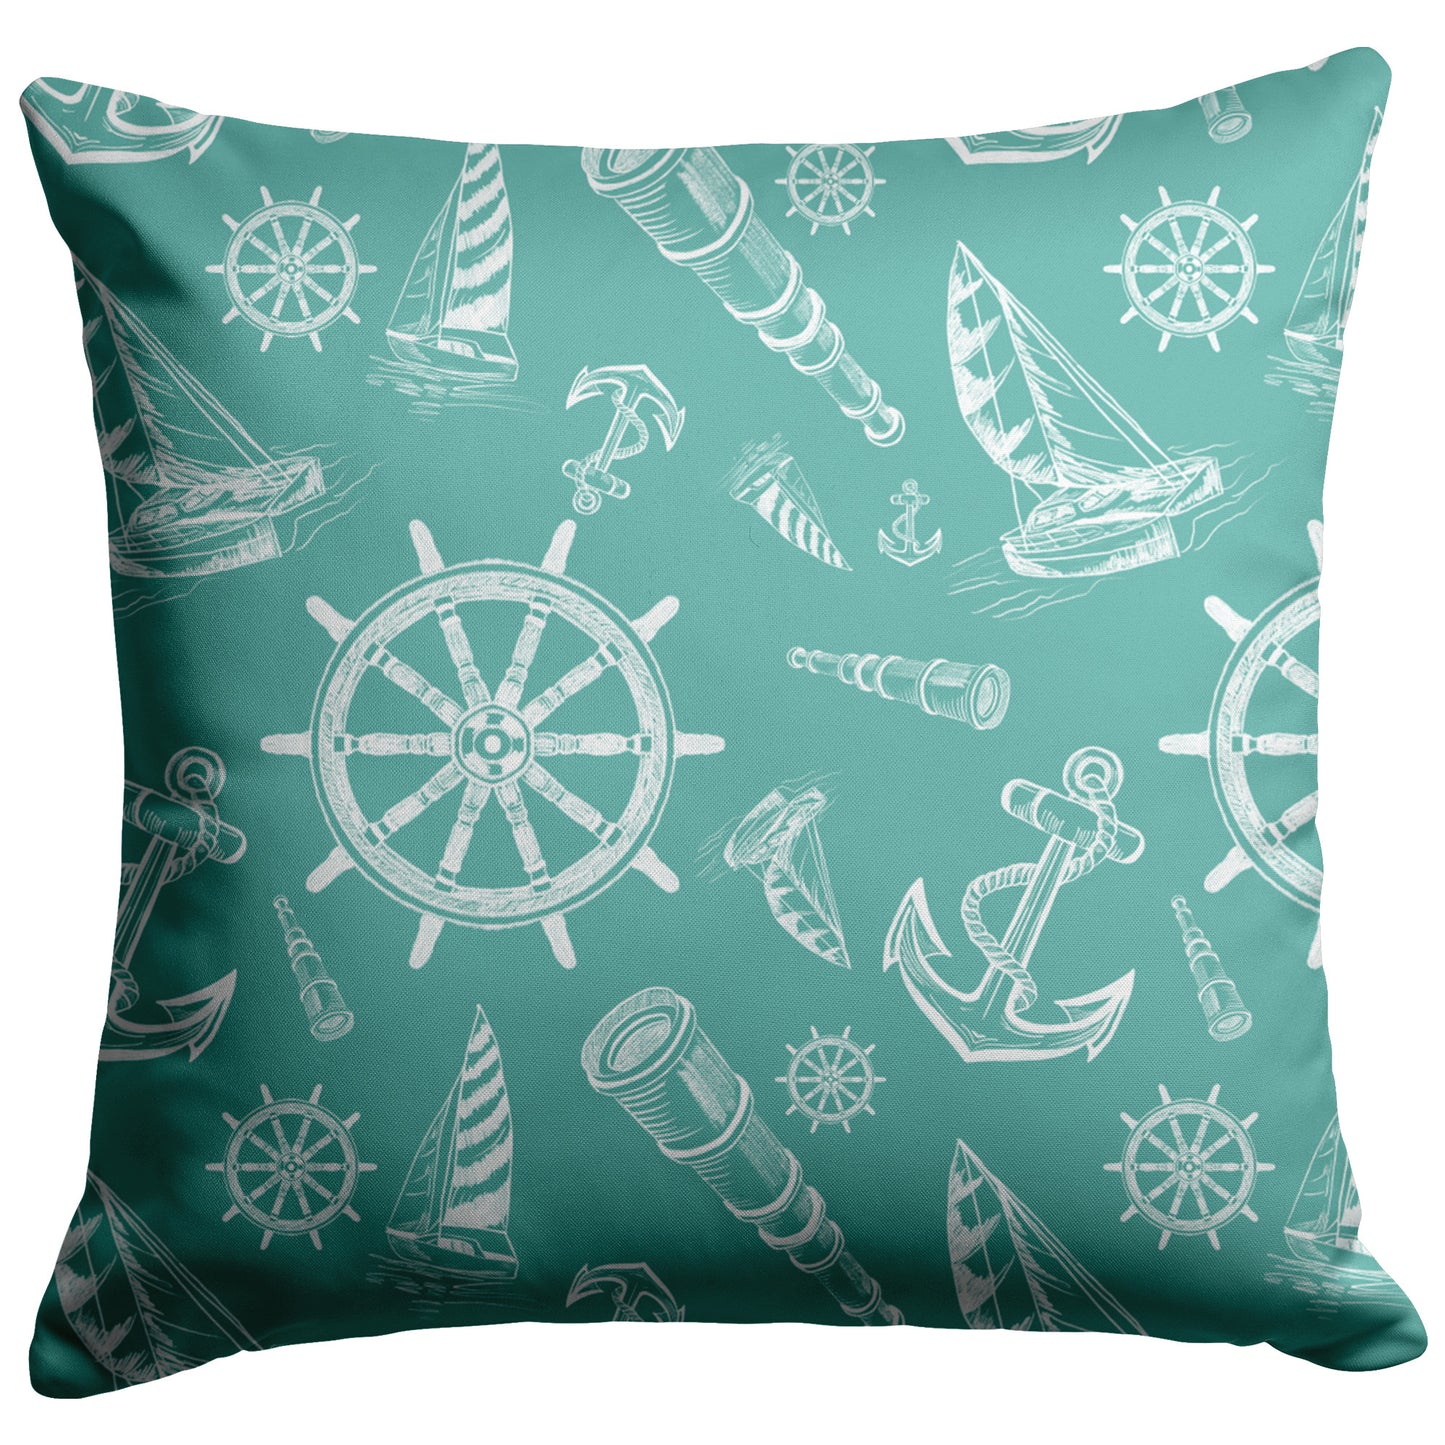 Nautical Sketches Design on Succulent Background, Throw Pillow